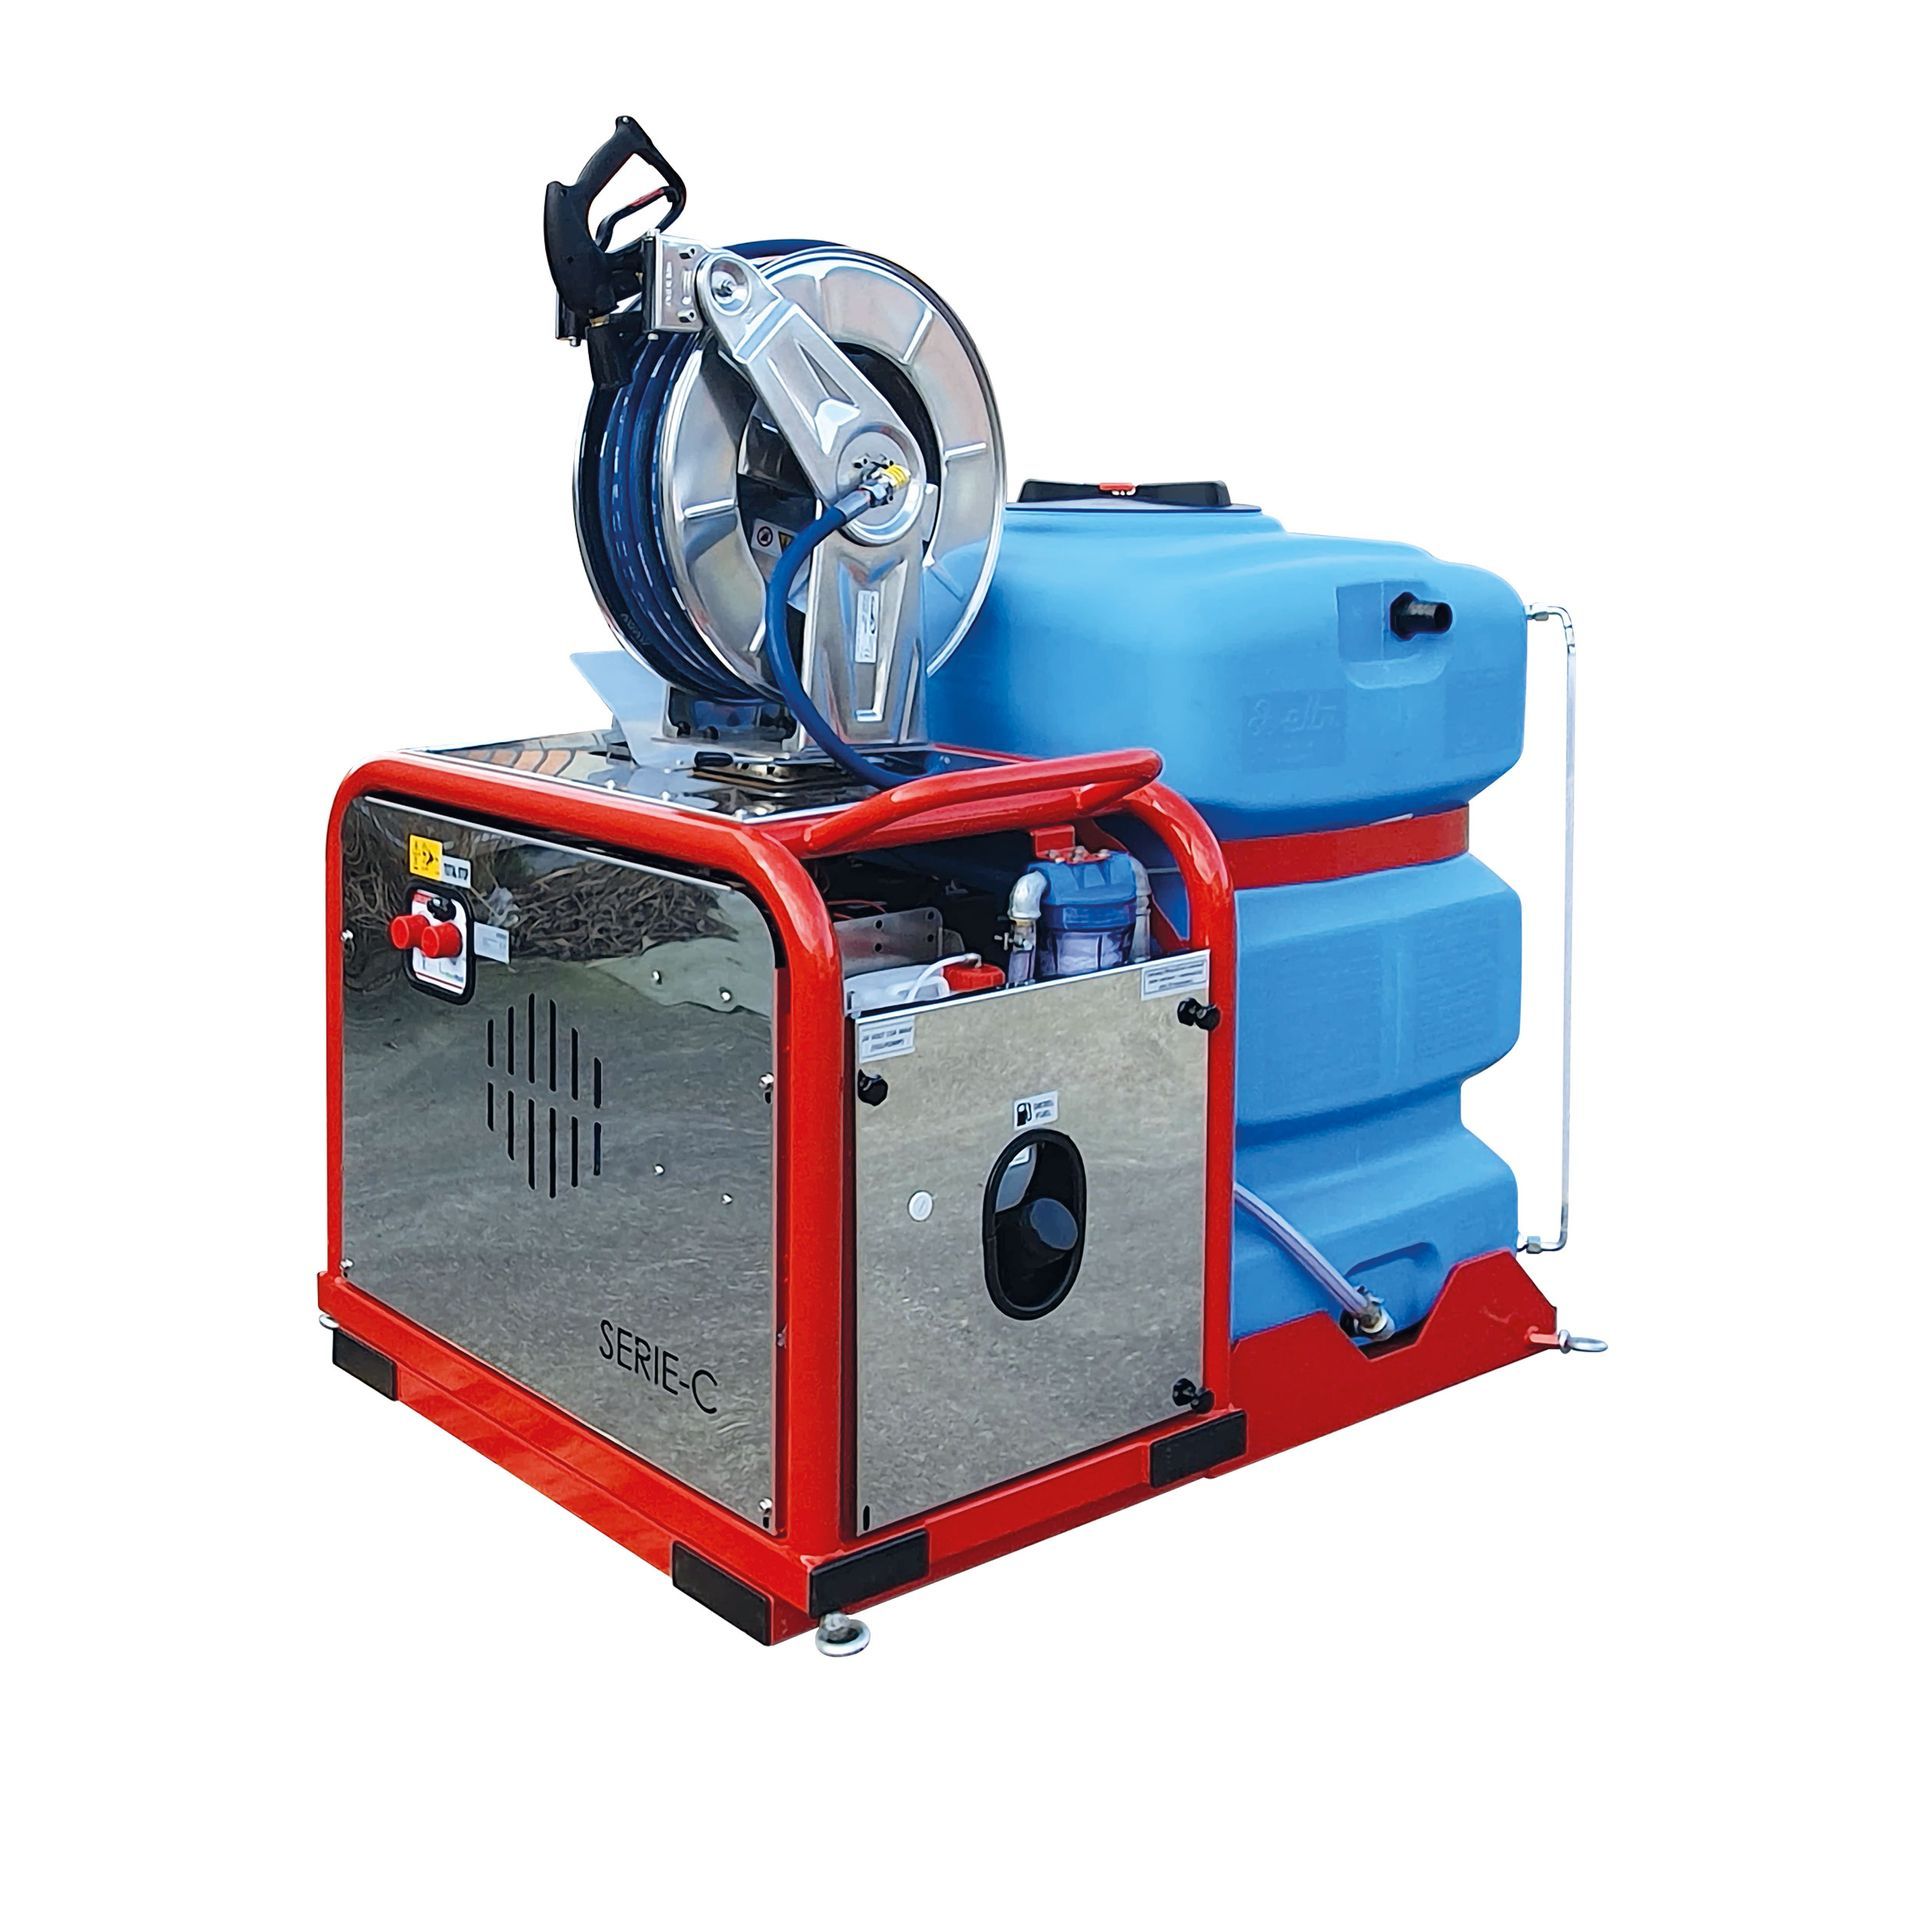 Meclean professional hot water pressure washer SERIE-CFB with WeedPLUS